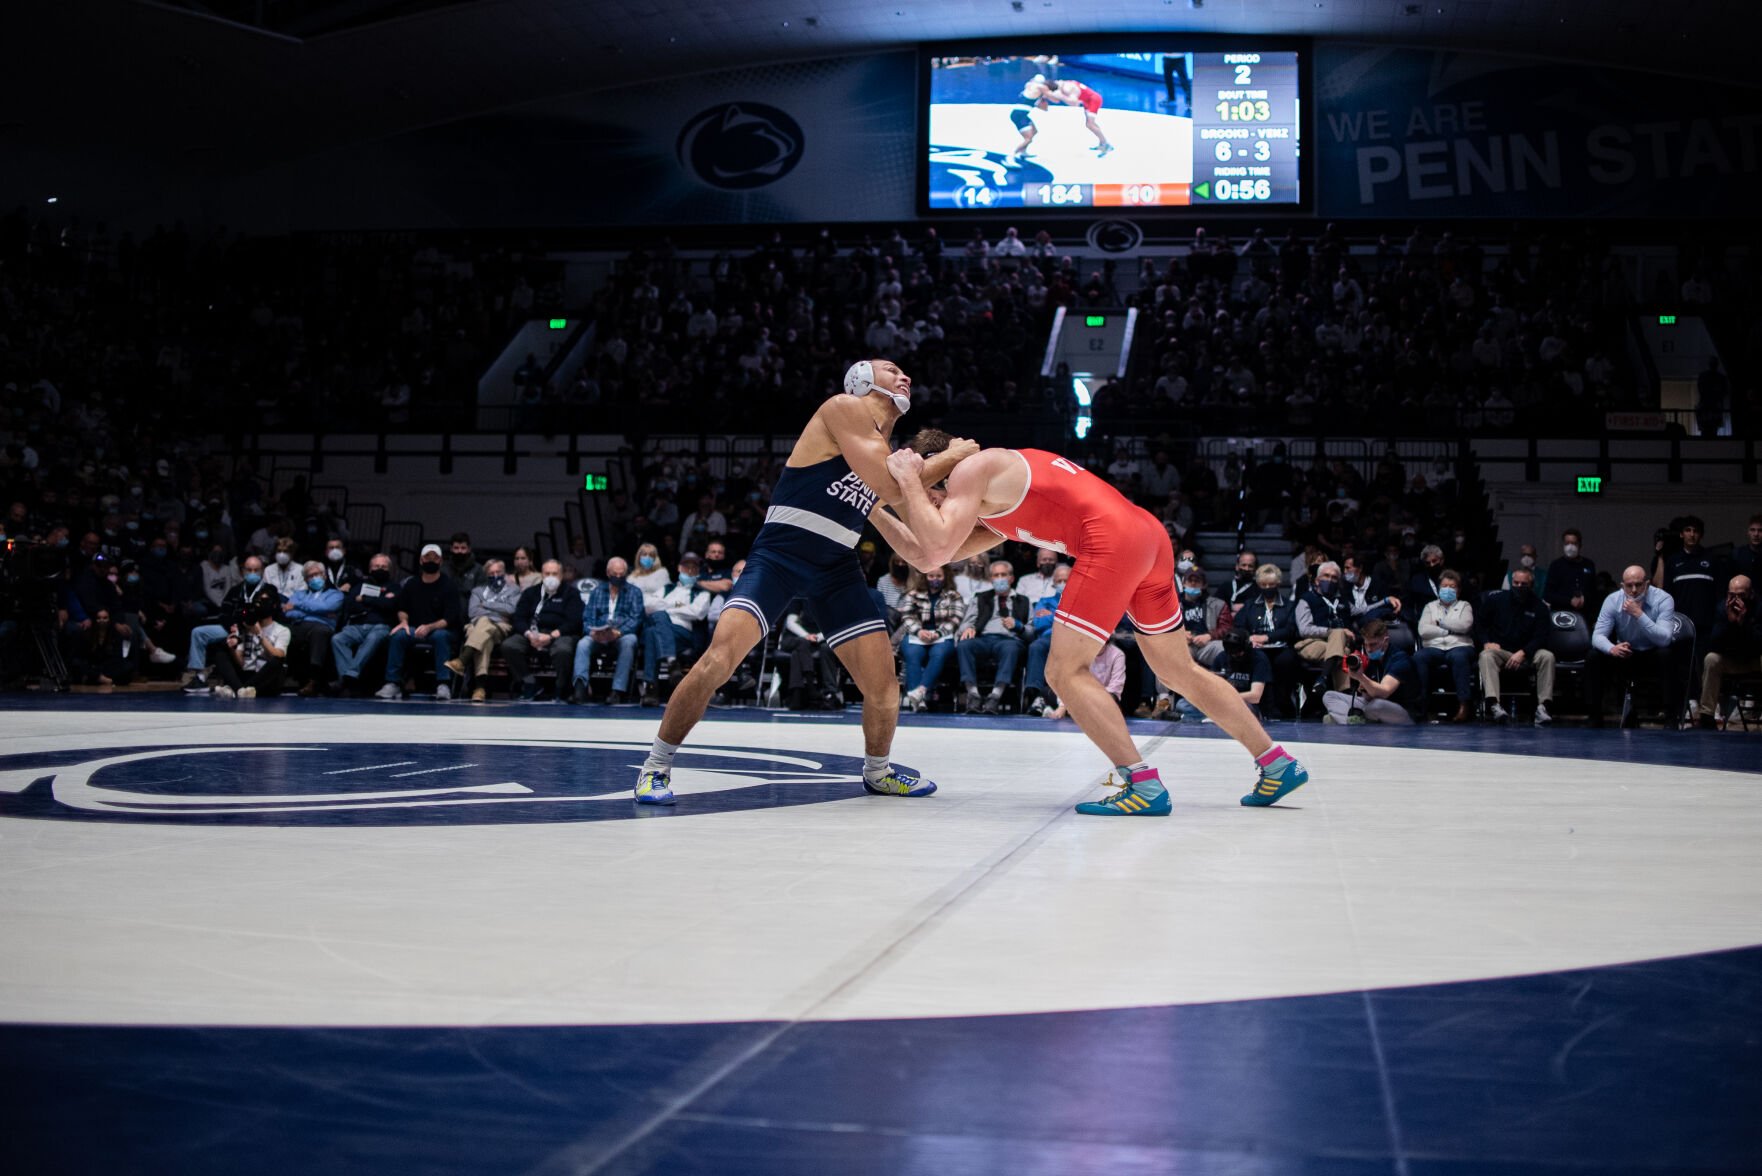 How to watch Penn State wrestlings Big Ten Tournament run Broadcast time, live stream, channel information Penn State Wrestling News psucollegian